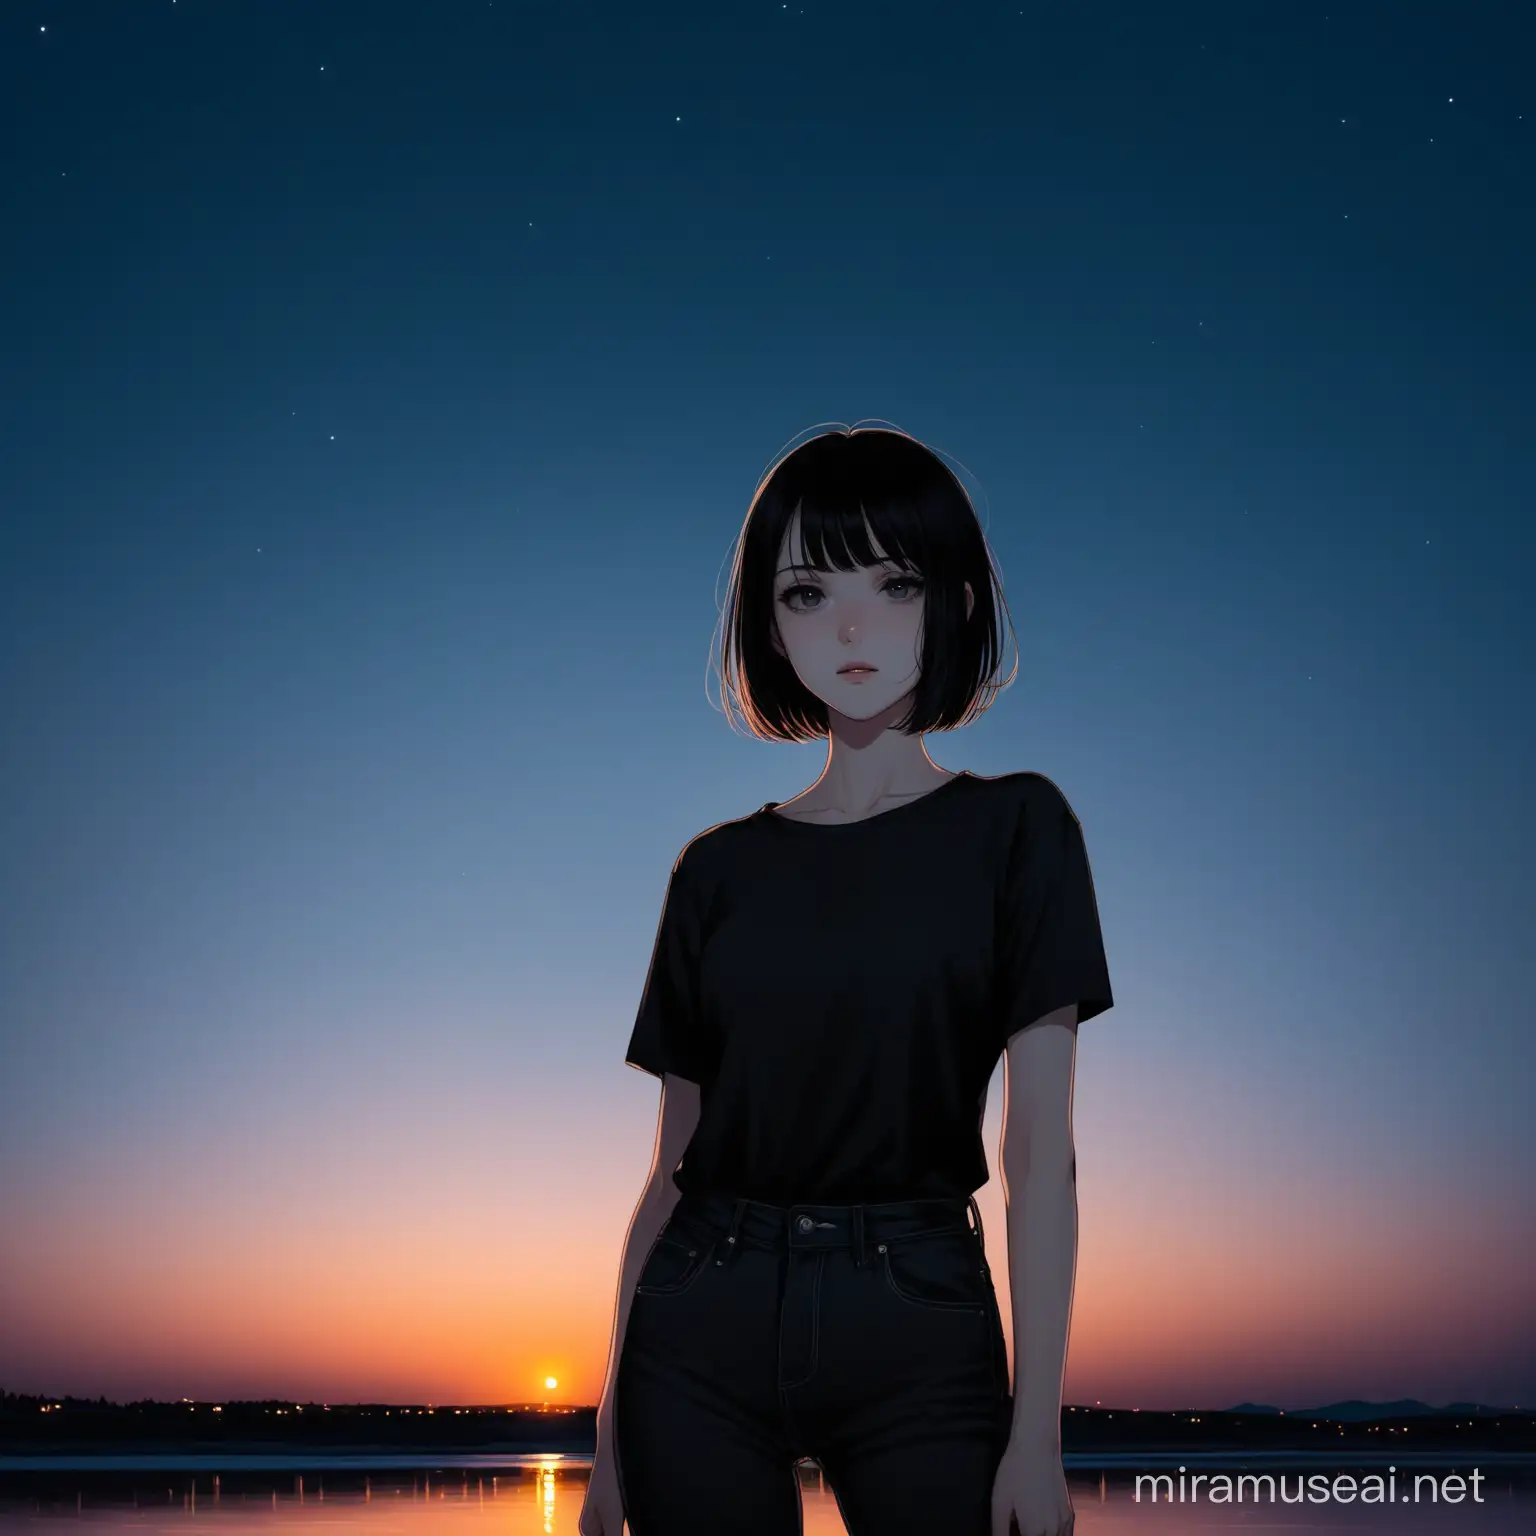 DarkHaired Woman in Black Jeans and TShirt Stands Against Summer Vorkuta Night